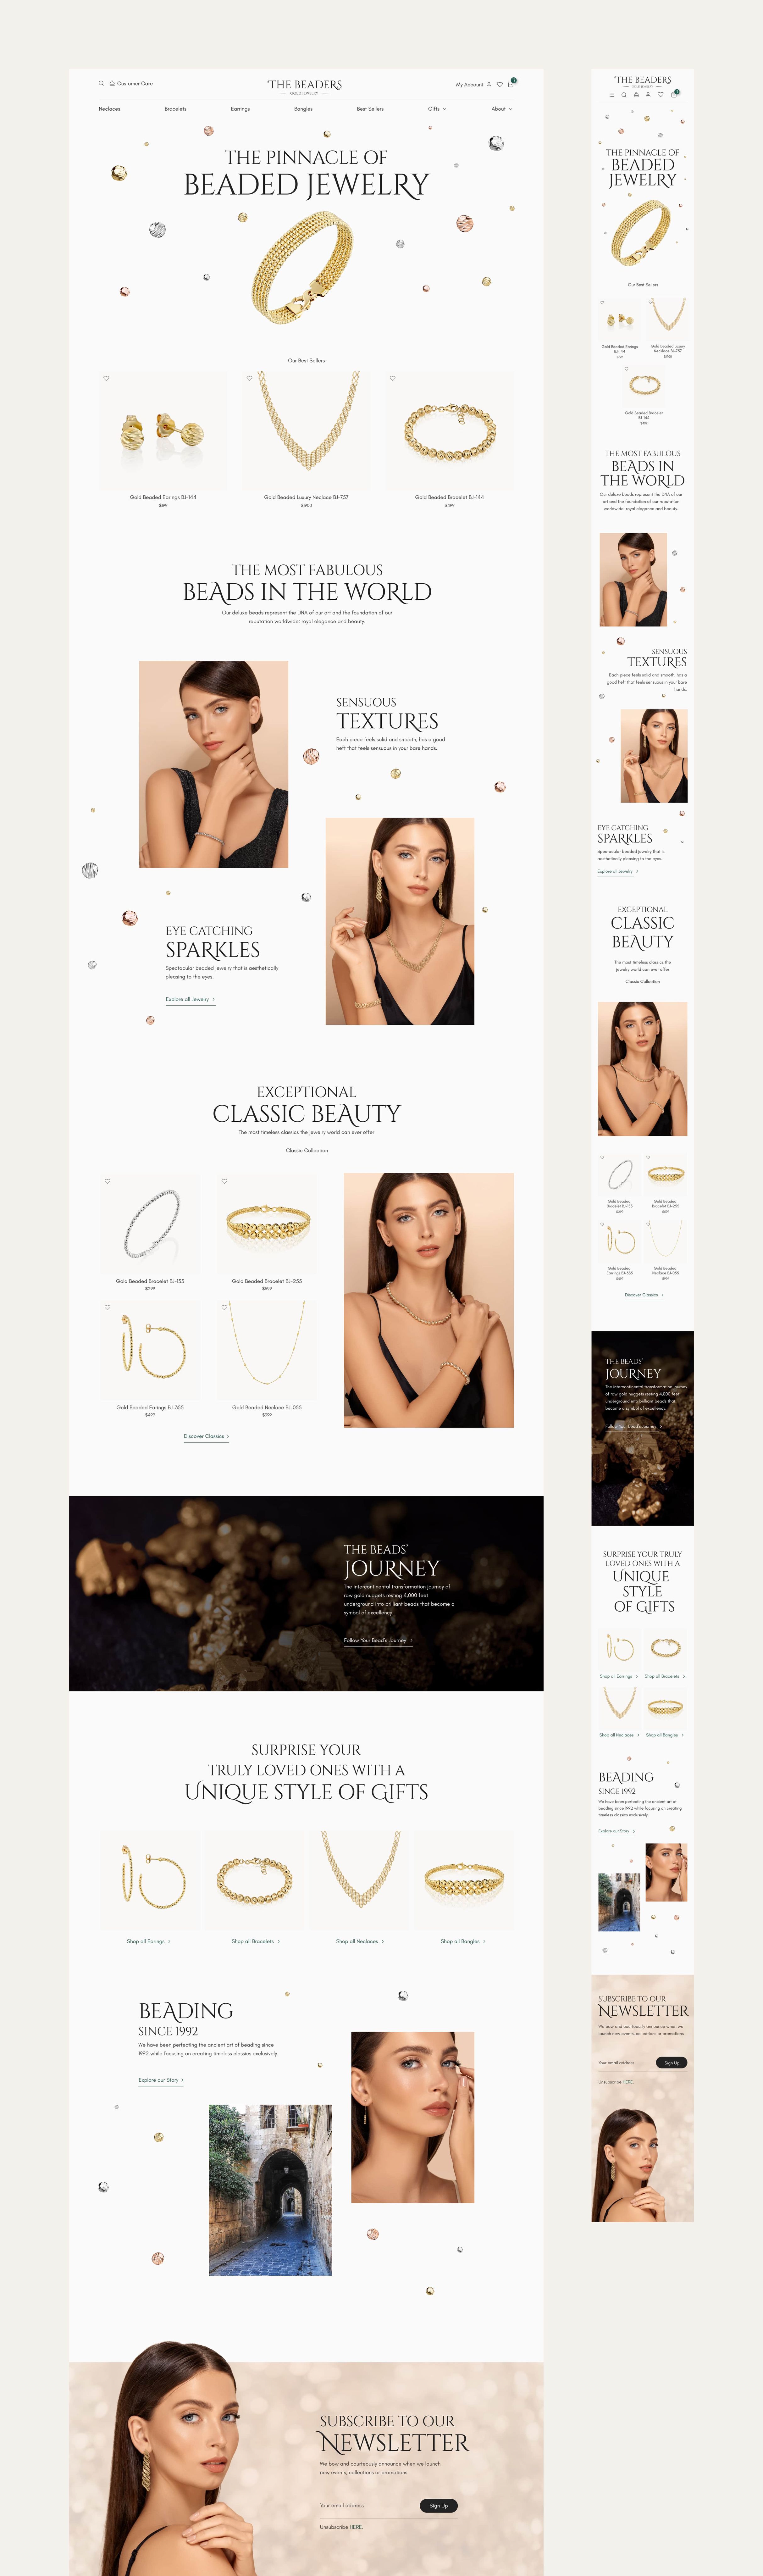 The Beaders responsive landing page: banner, bestelling products, features section, classic beauty products highlighting, beads journey, categorization , about & newslettersection